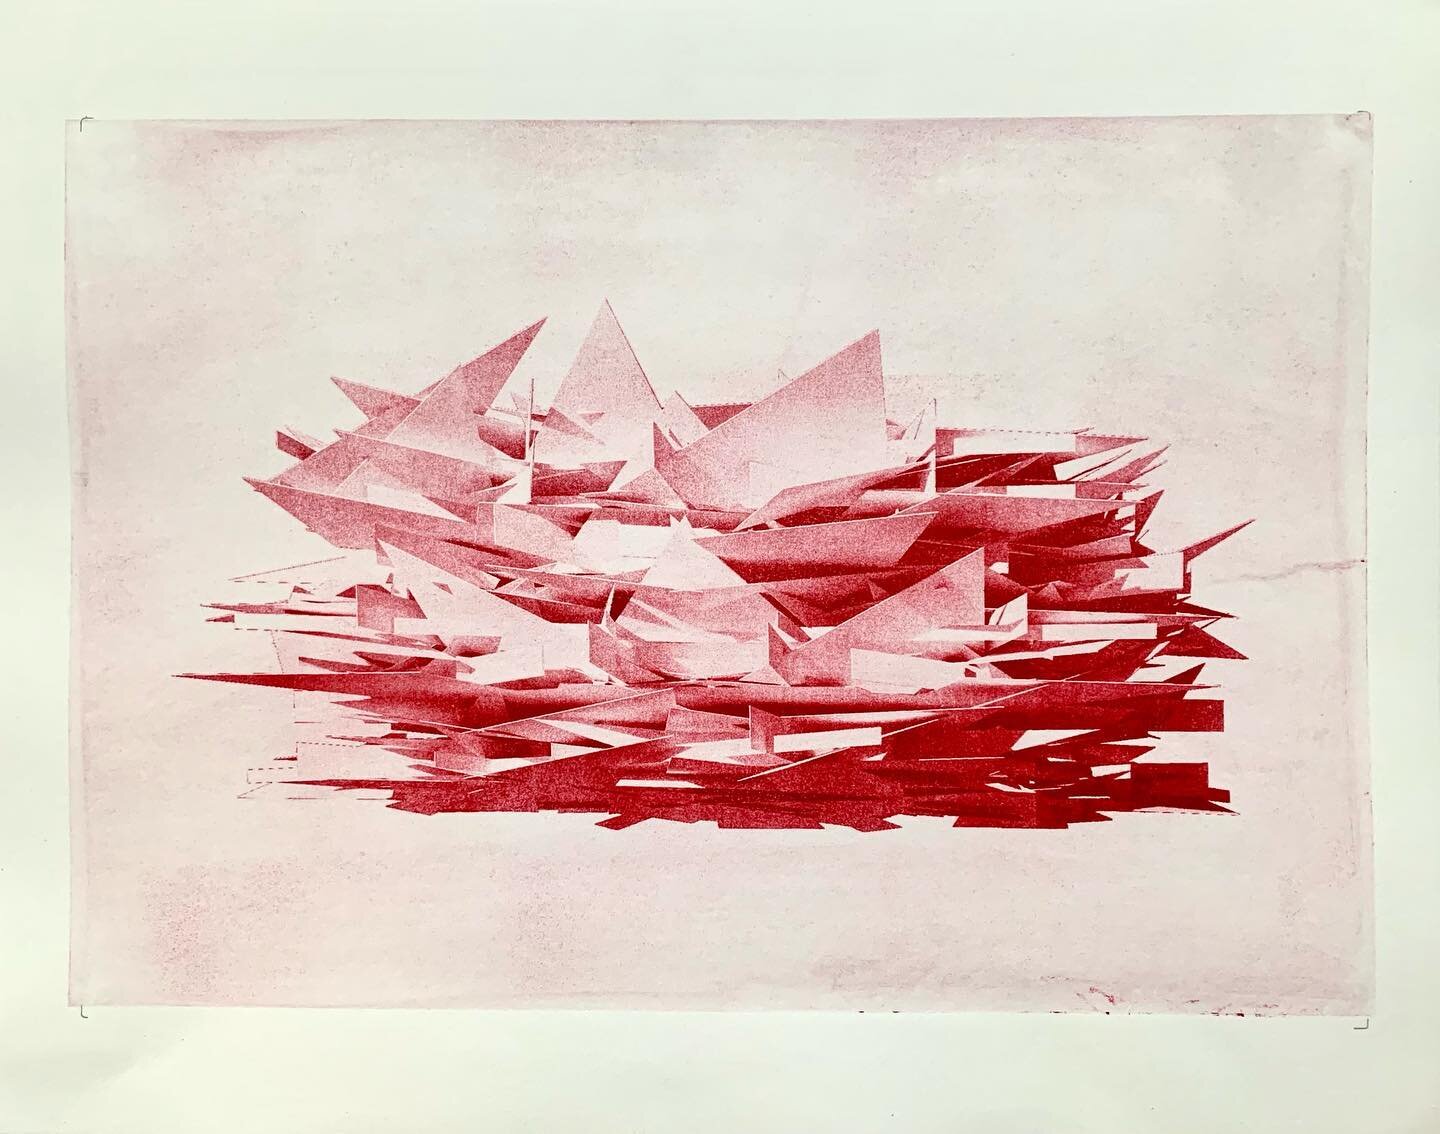 Title: &ldquo;Caravel&rdquo;
&copy; Oliver Staeuber
Lithography on paper 
Format A3
Paper: Zerkall kupfer paper 250gr.
Made in: Bern, Switzerland @atelier_tomblaess 
Year: 2022
One of a kind
Available
.
.
.
.
.
#oliver_staeuber #artgallery #arte #out